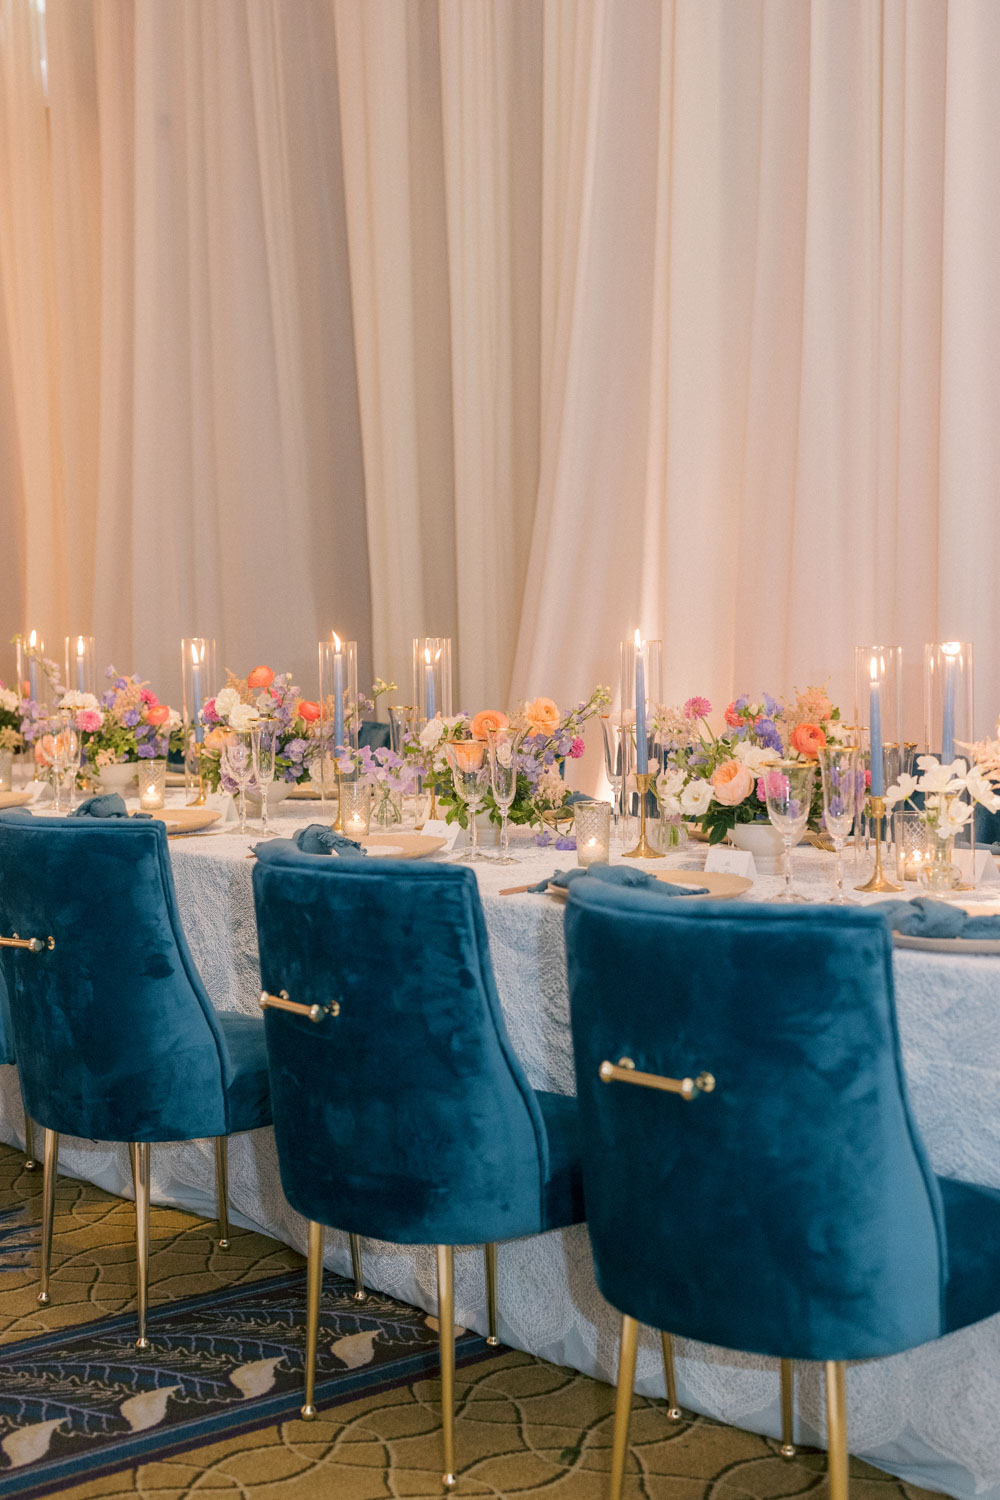 A wedding reception with blue velvet chairs and colorful flowers.